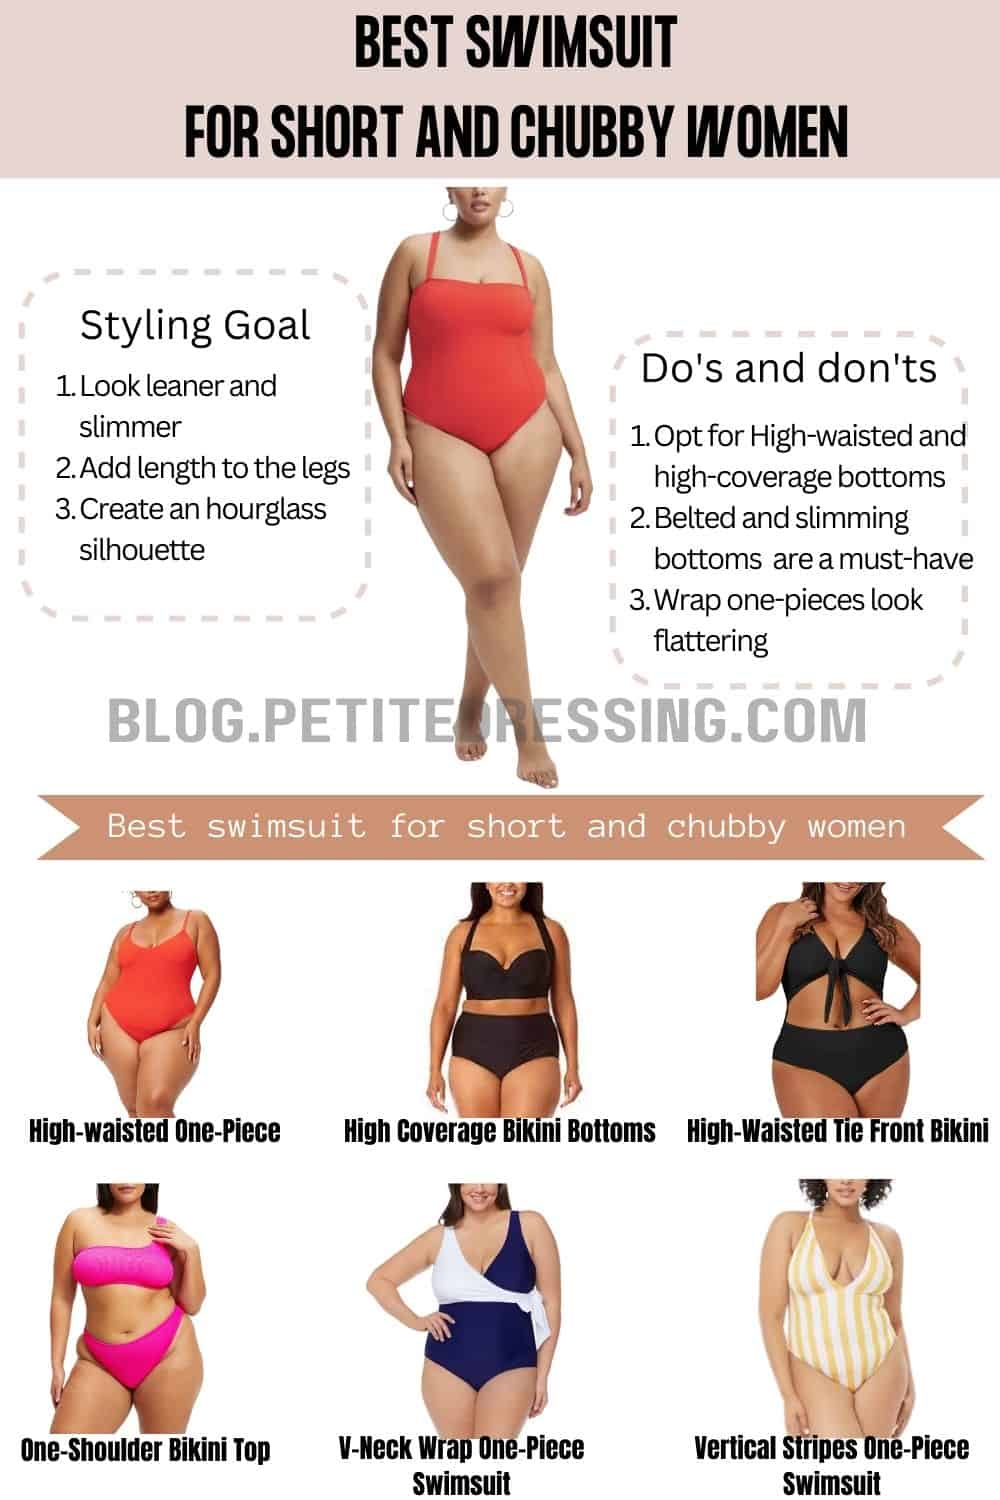 The Complete Swimsuit Guide for Short and Chubby Women